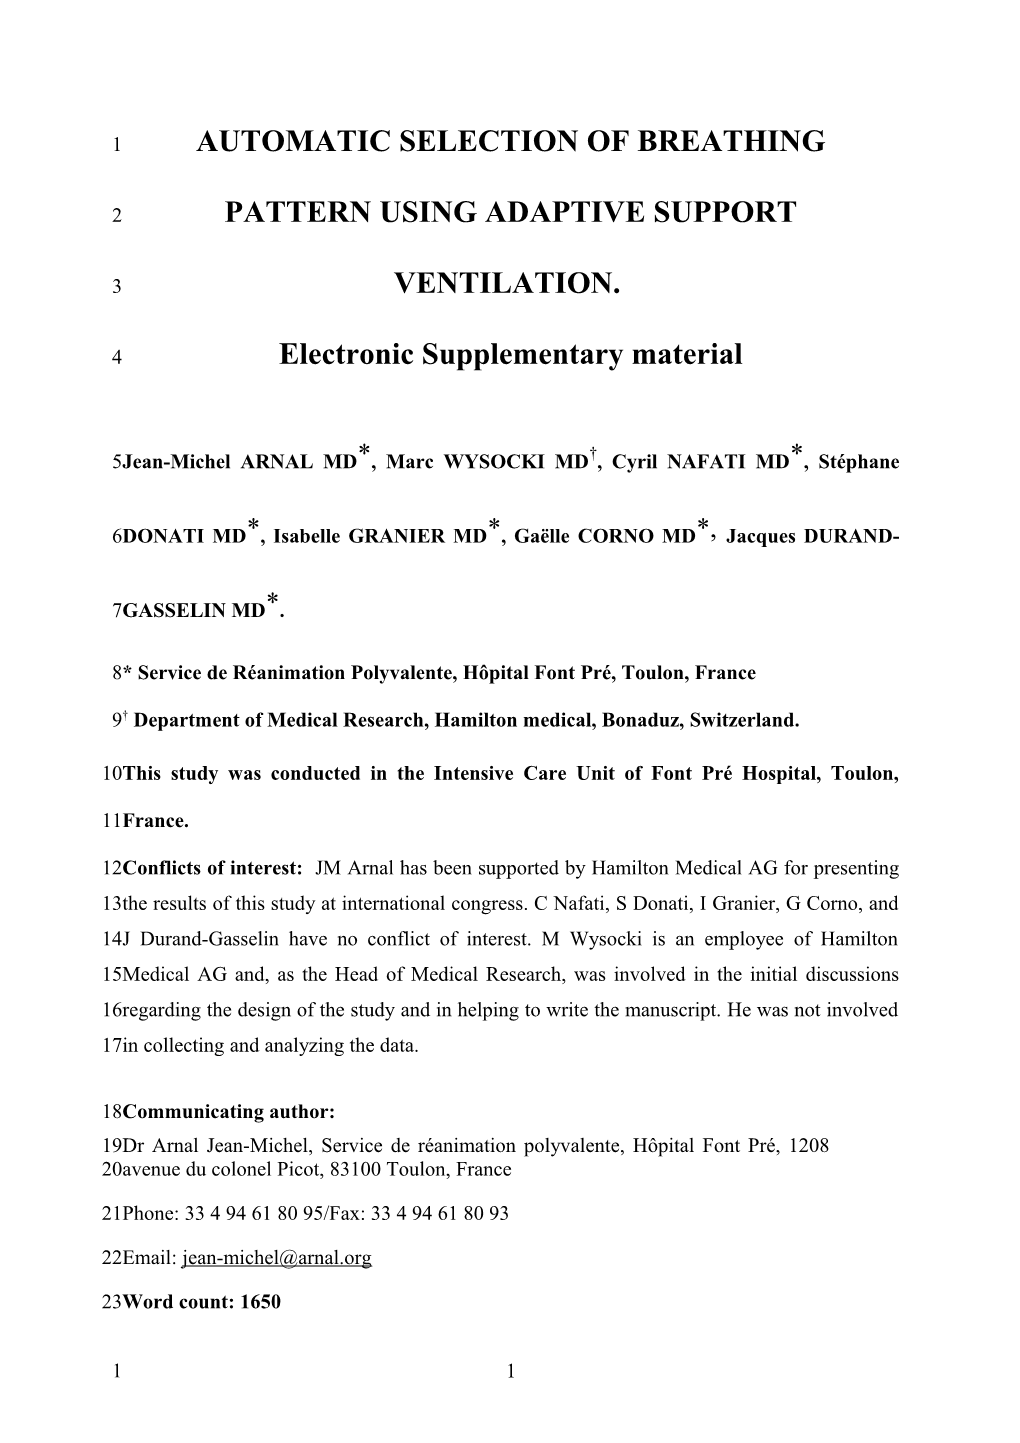 Breathing Pattern Delivered by an Automatic Mode of Mechanical Ventilation in Intensive Care